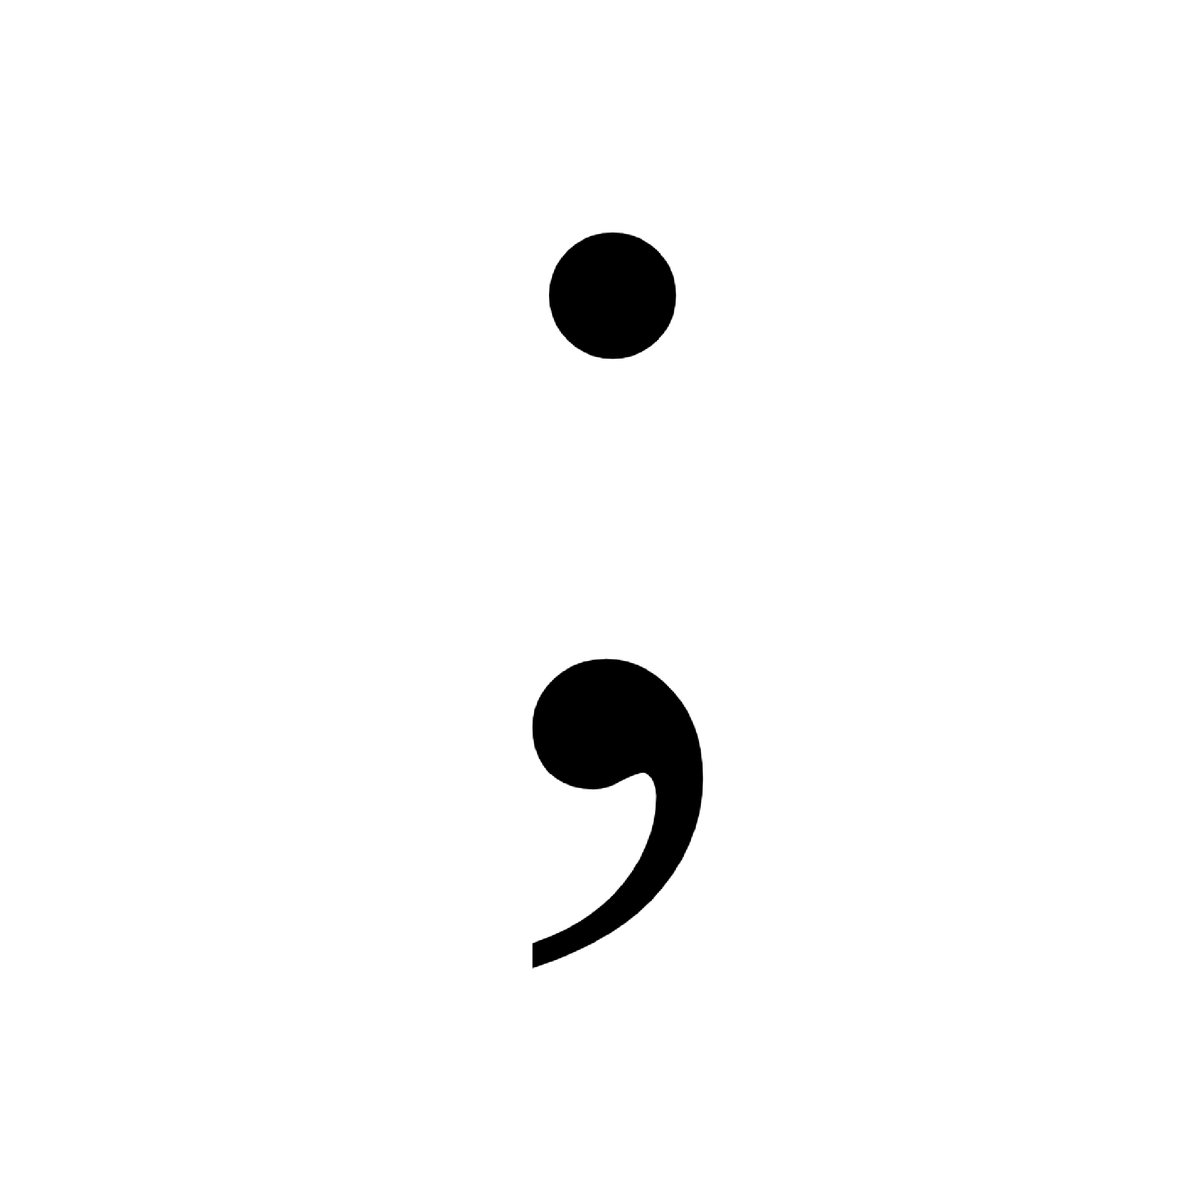 Don't fear the semicolon.

Here's how to use it: